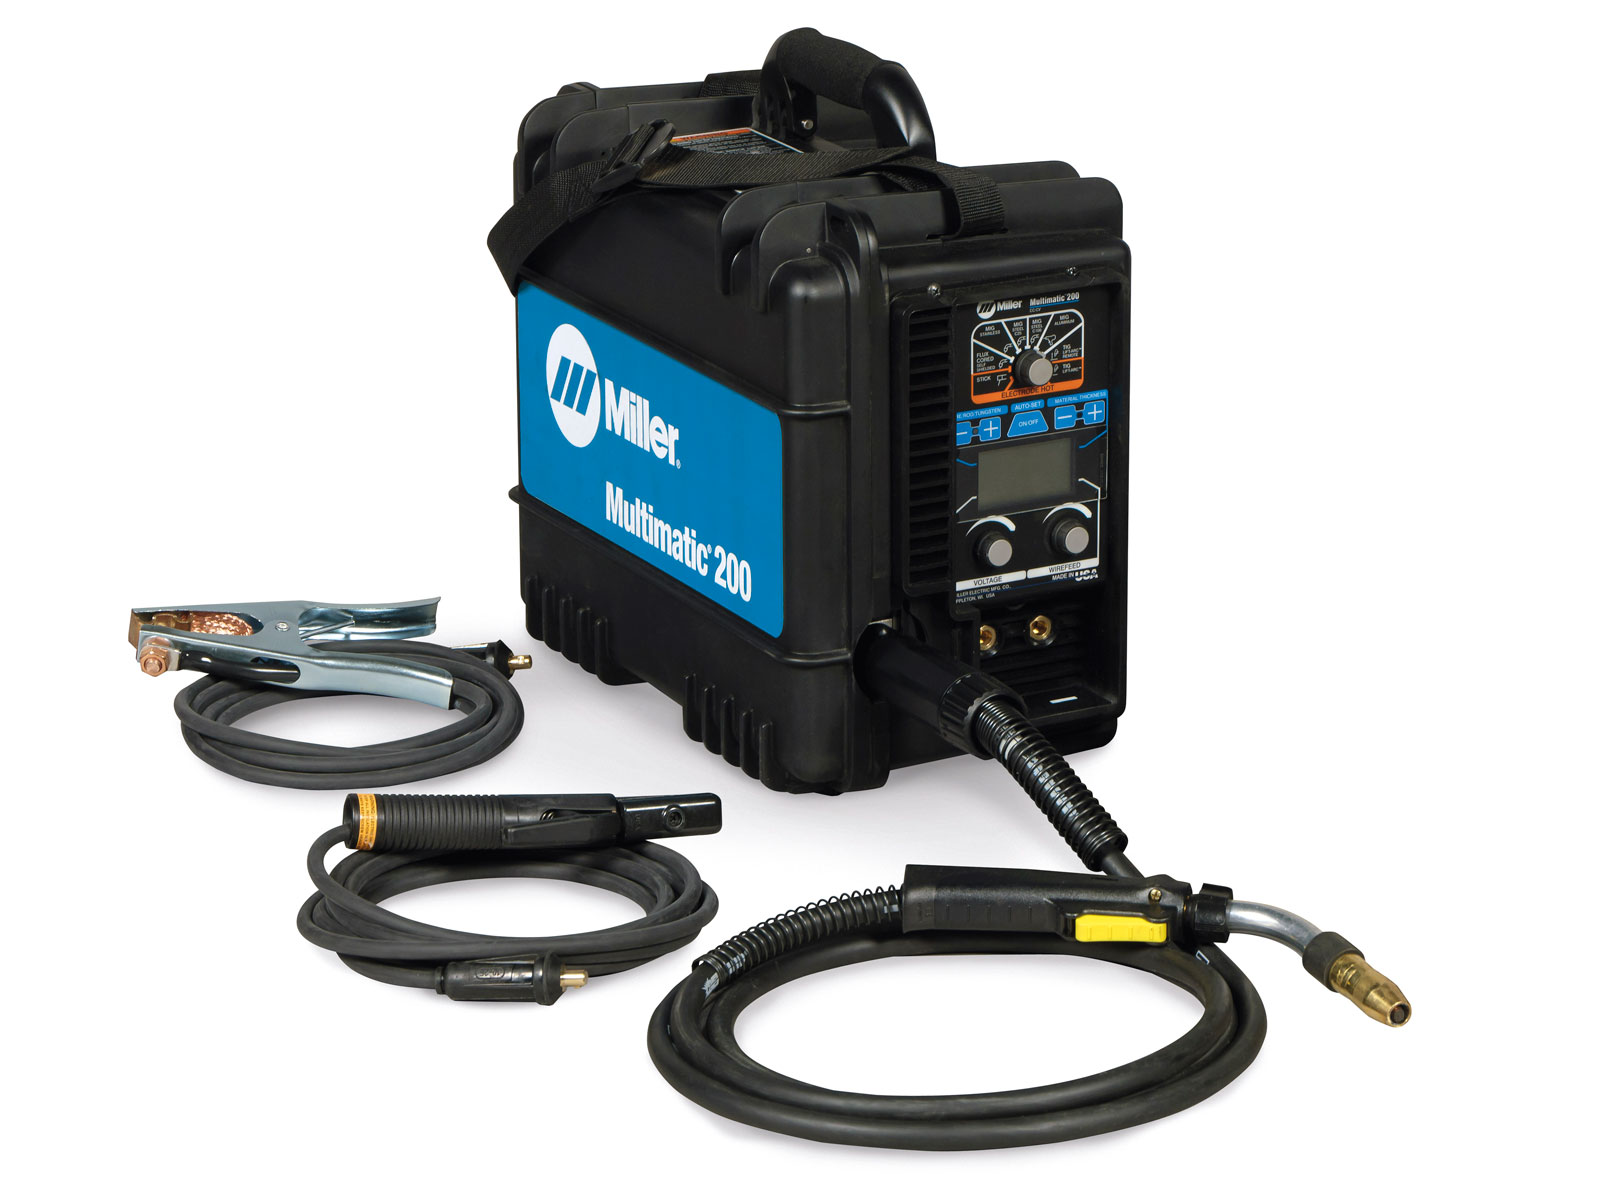 New Multimatic? 200 All-in-One Portable Welding System Offers MIG, Stick and TIG Processes in a Single, Compact Package - Hot Bike Magazine